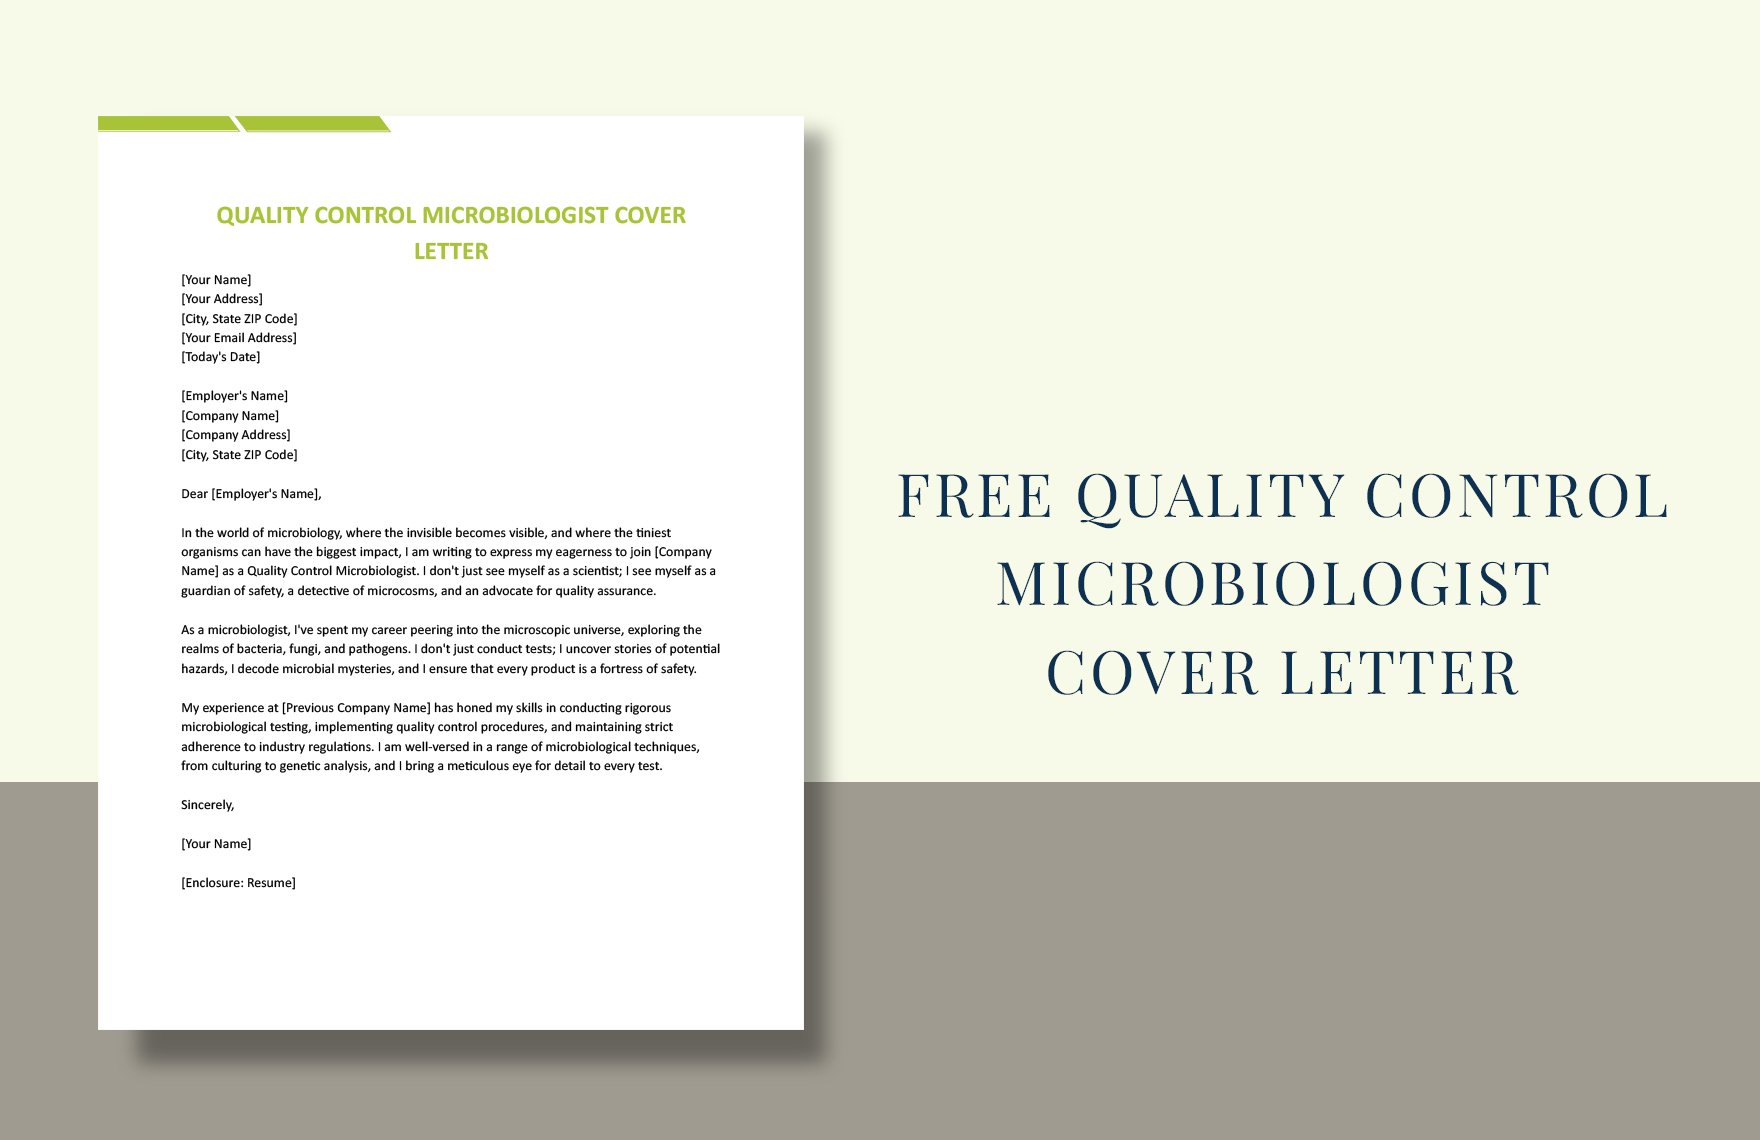 Quality Control Microbiologist Cover Letter